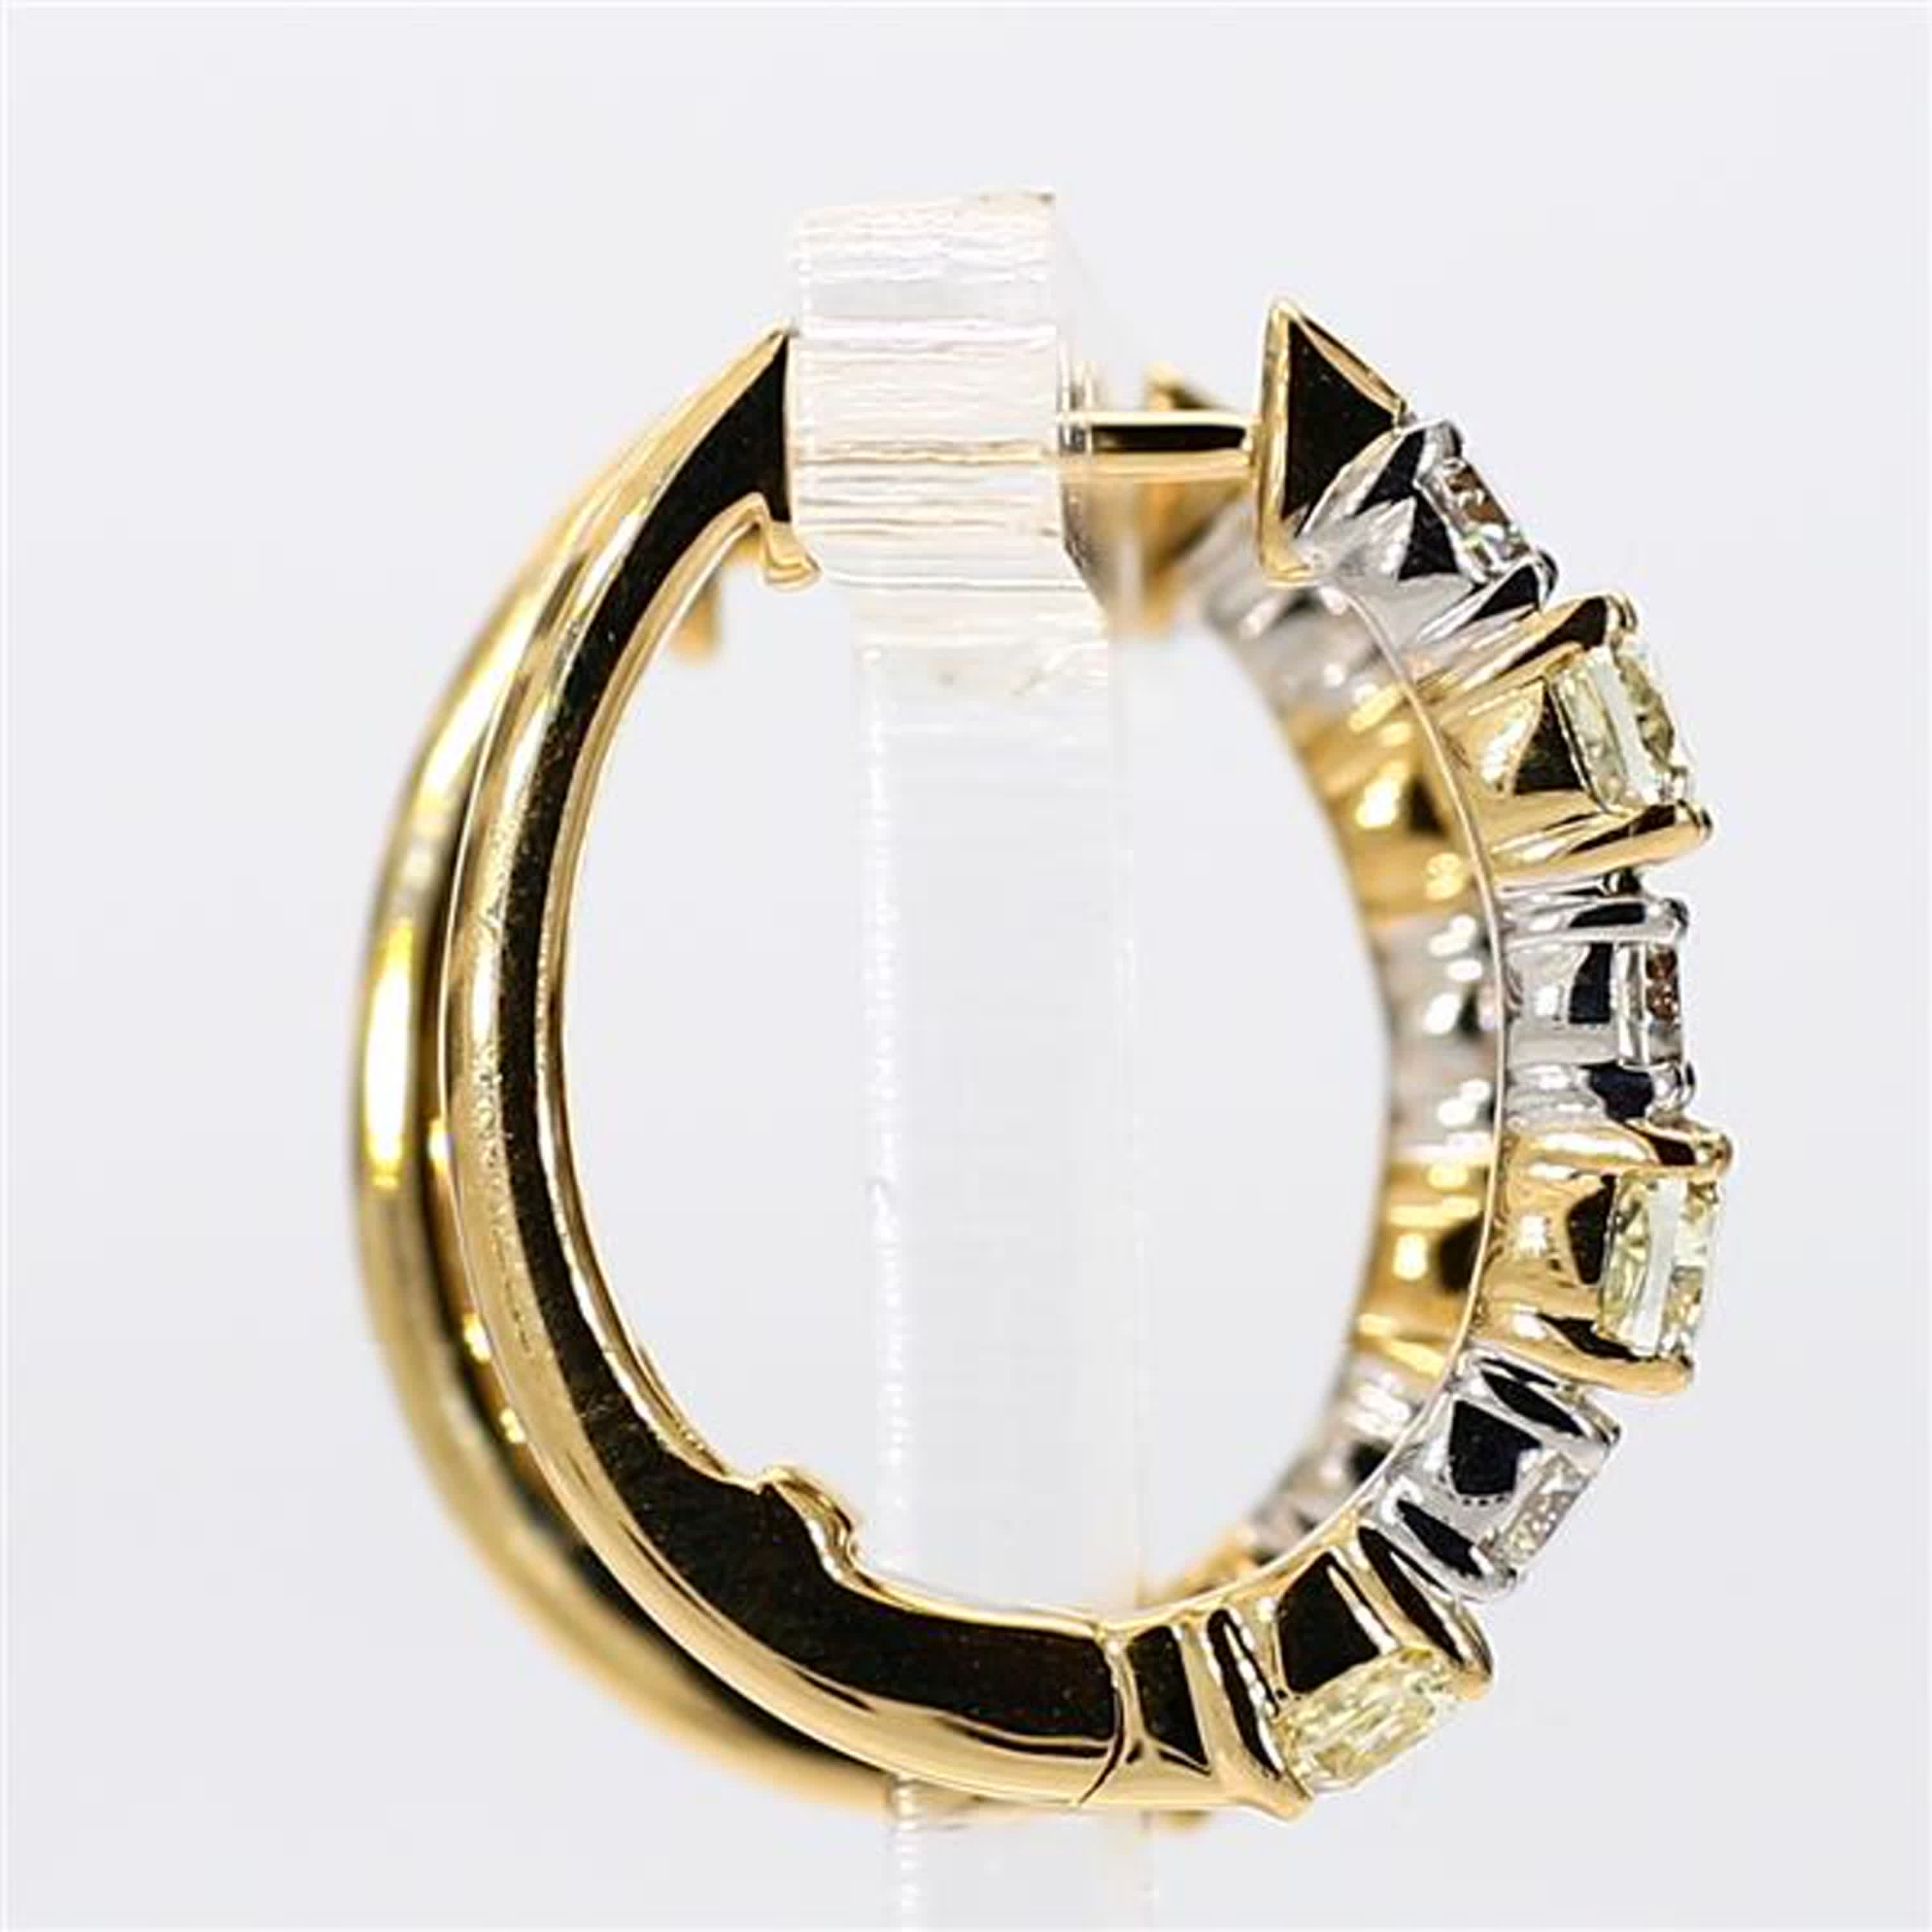 Natural Yellow Cushion and White Diamond 2.36 Carat TW Gold Hoop Earrings